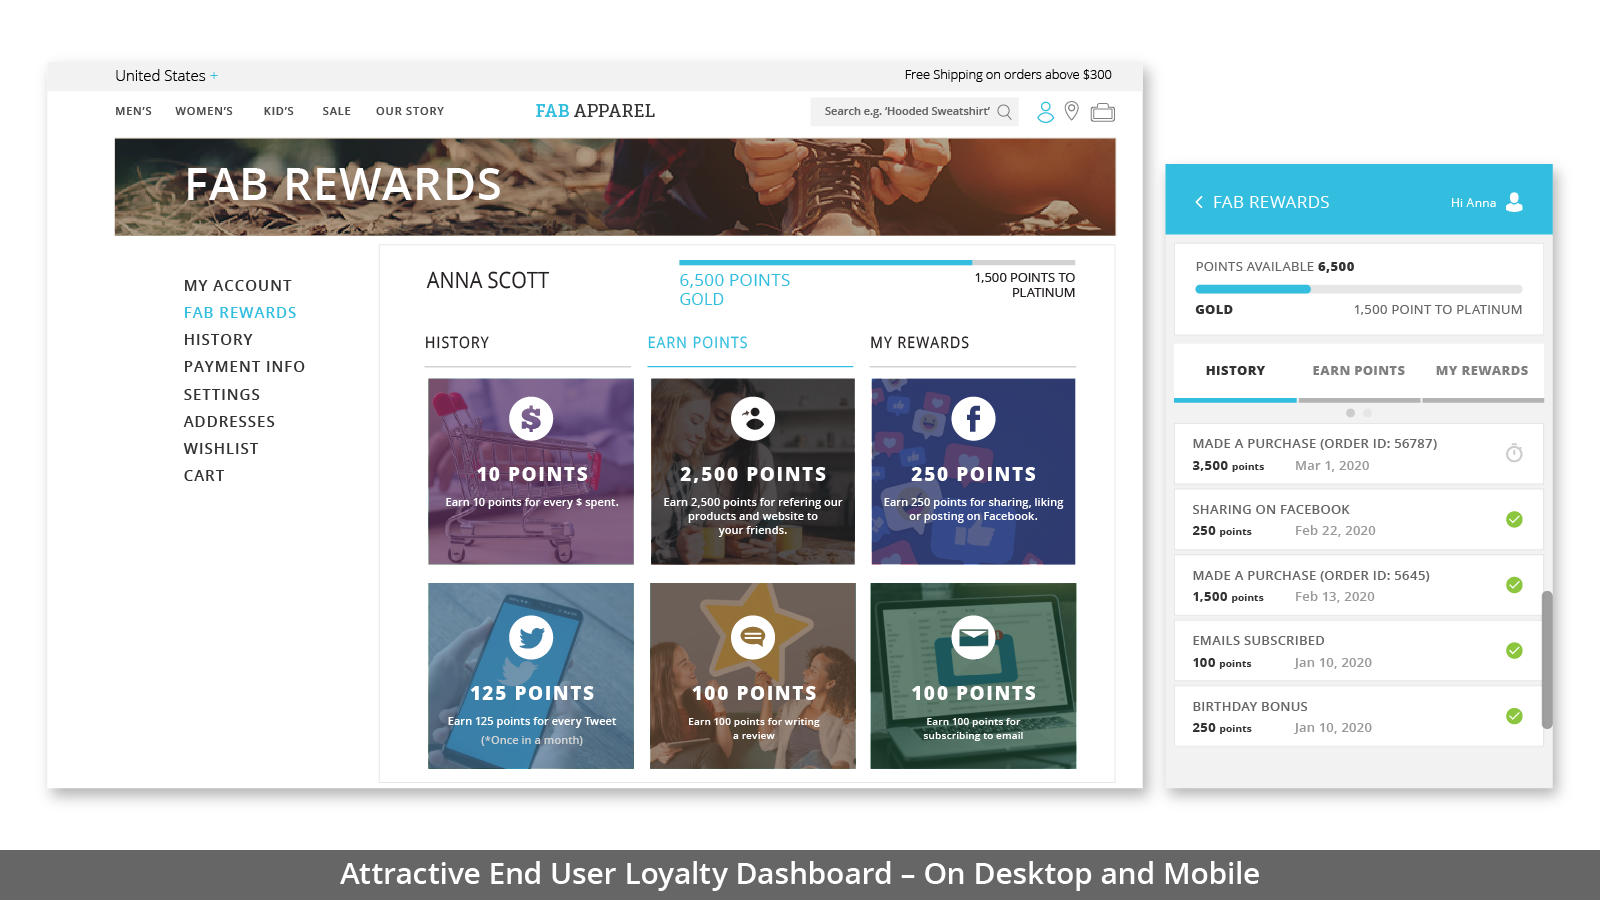 ATTRACTIVE END USER LOYALTY DASHBOARD- ON DESKTOP AND MOBILE